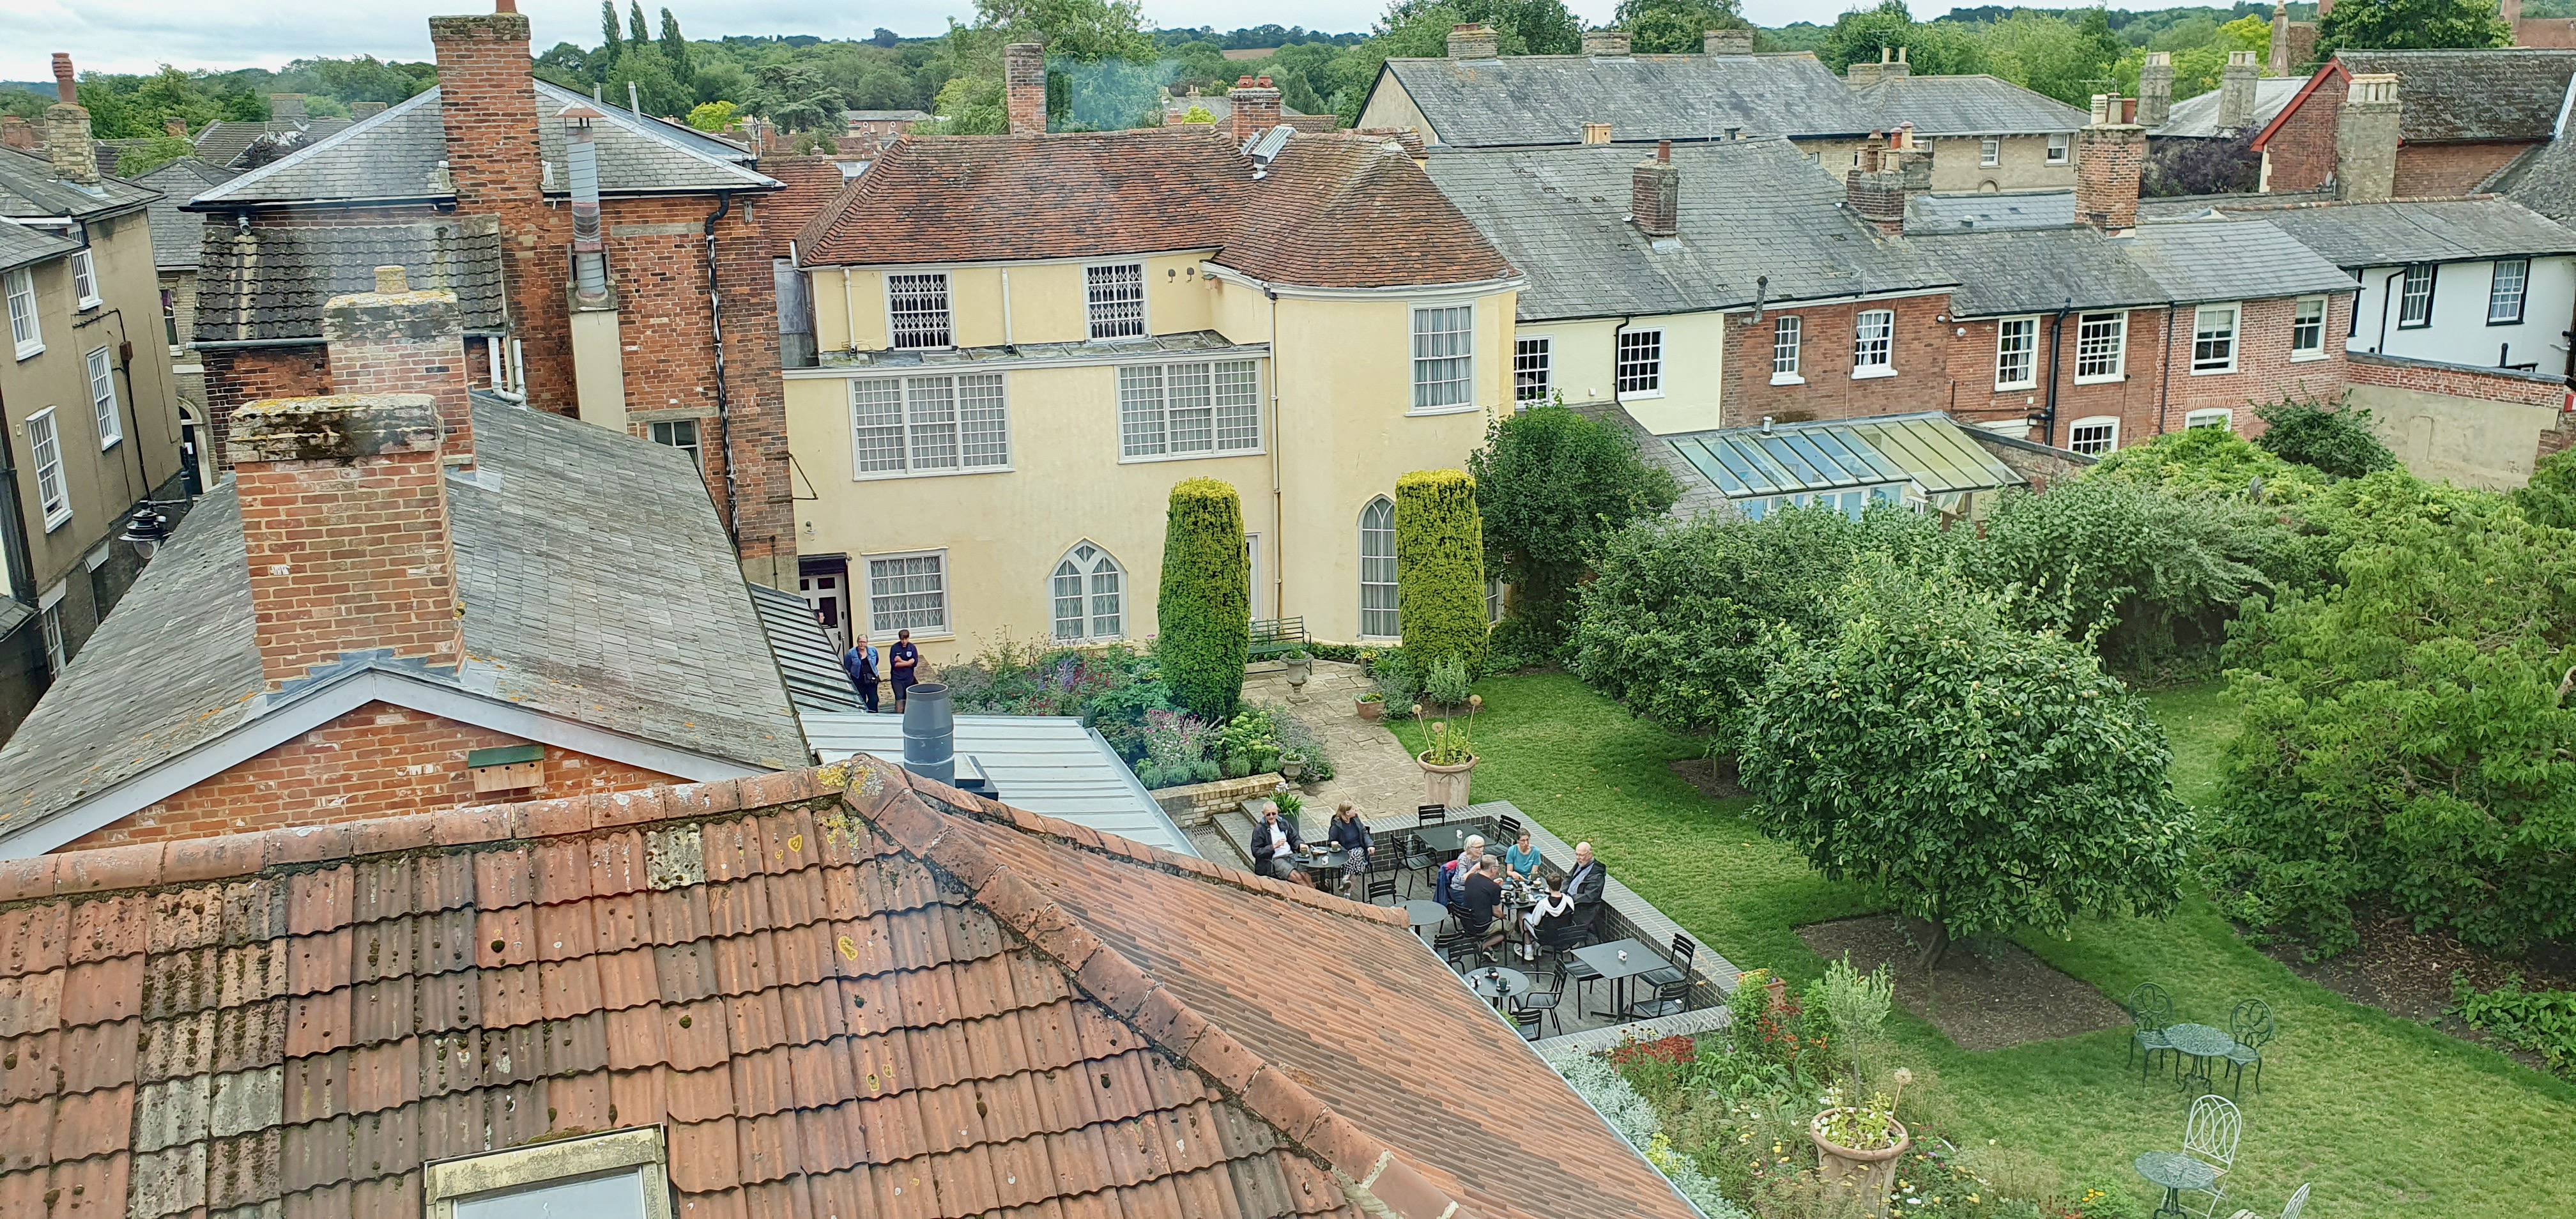 "View looking down onto the rear yellow of Gainsborough house, set behind pretty garden with patio seating area for cafe to the left."